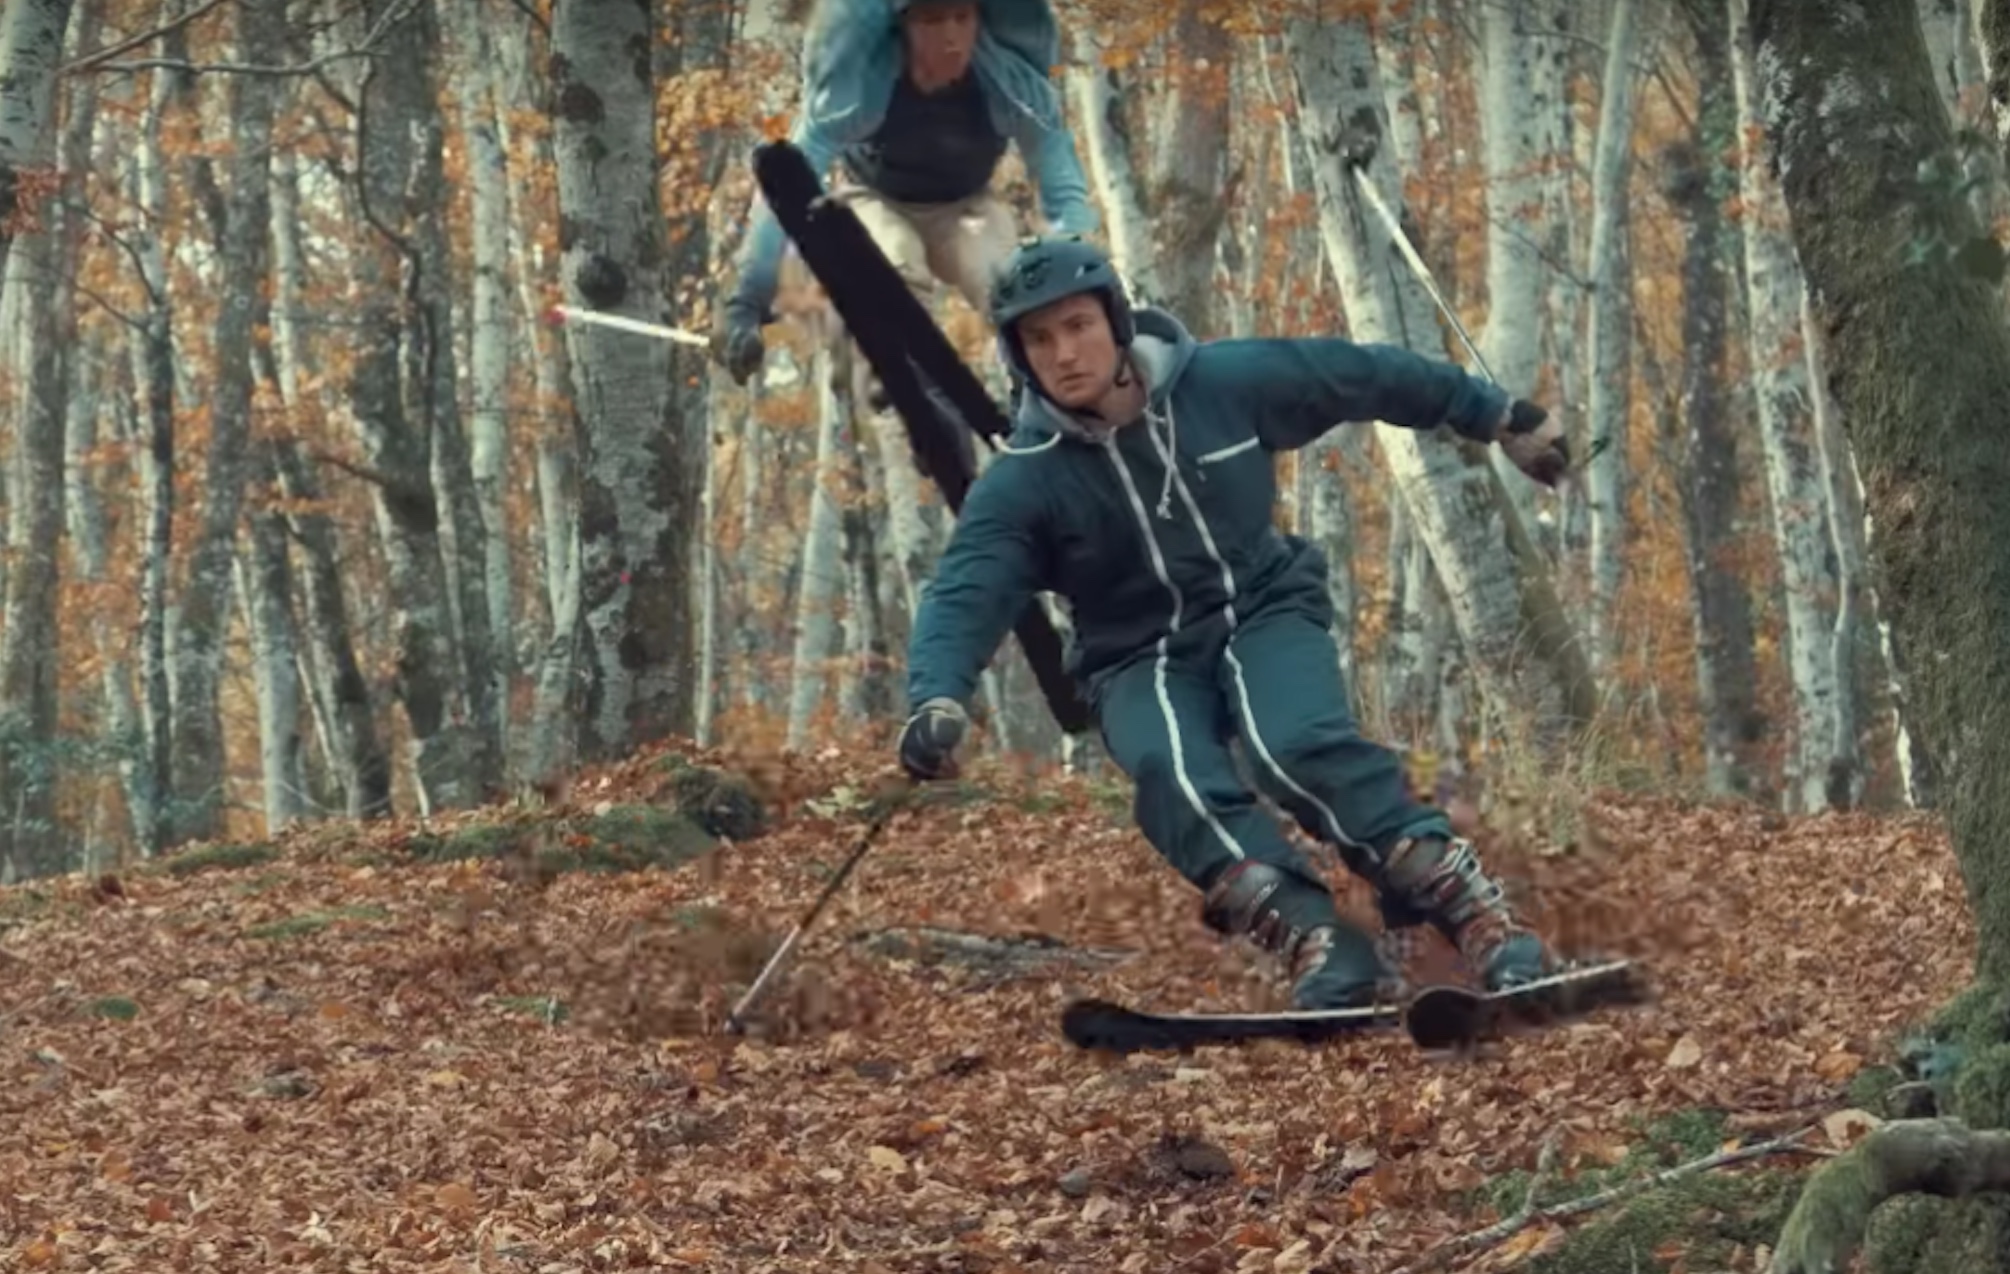 Embrace Autumn With This Leaf Skiing Segment From France